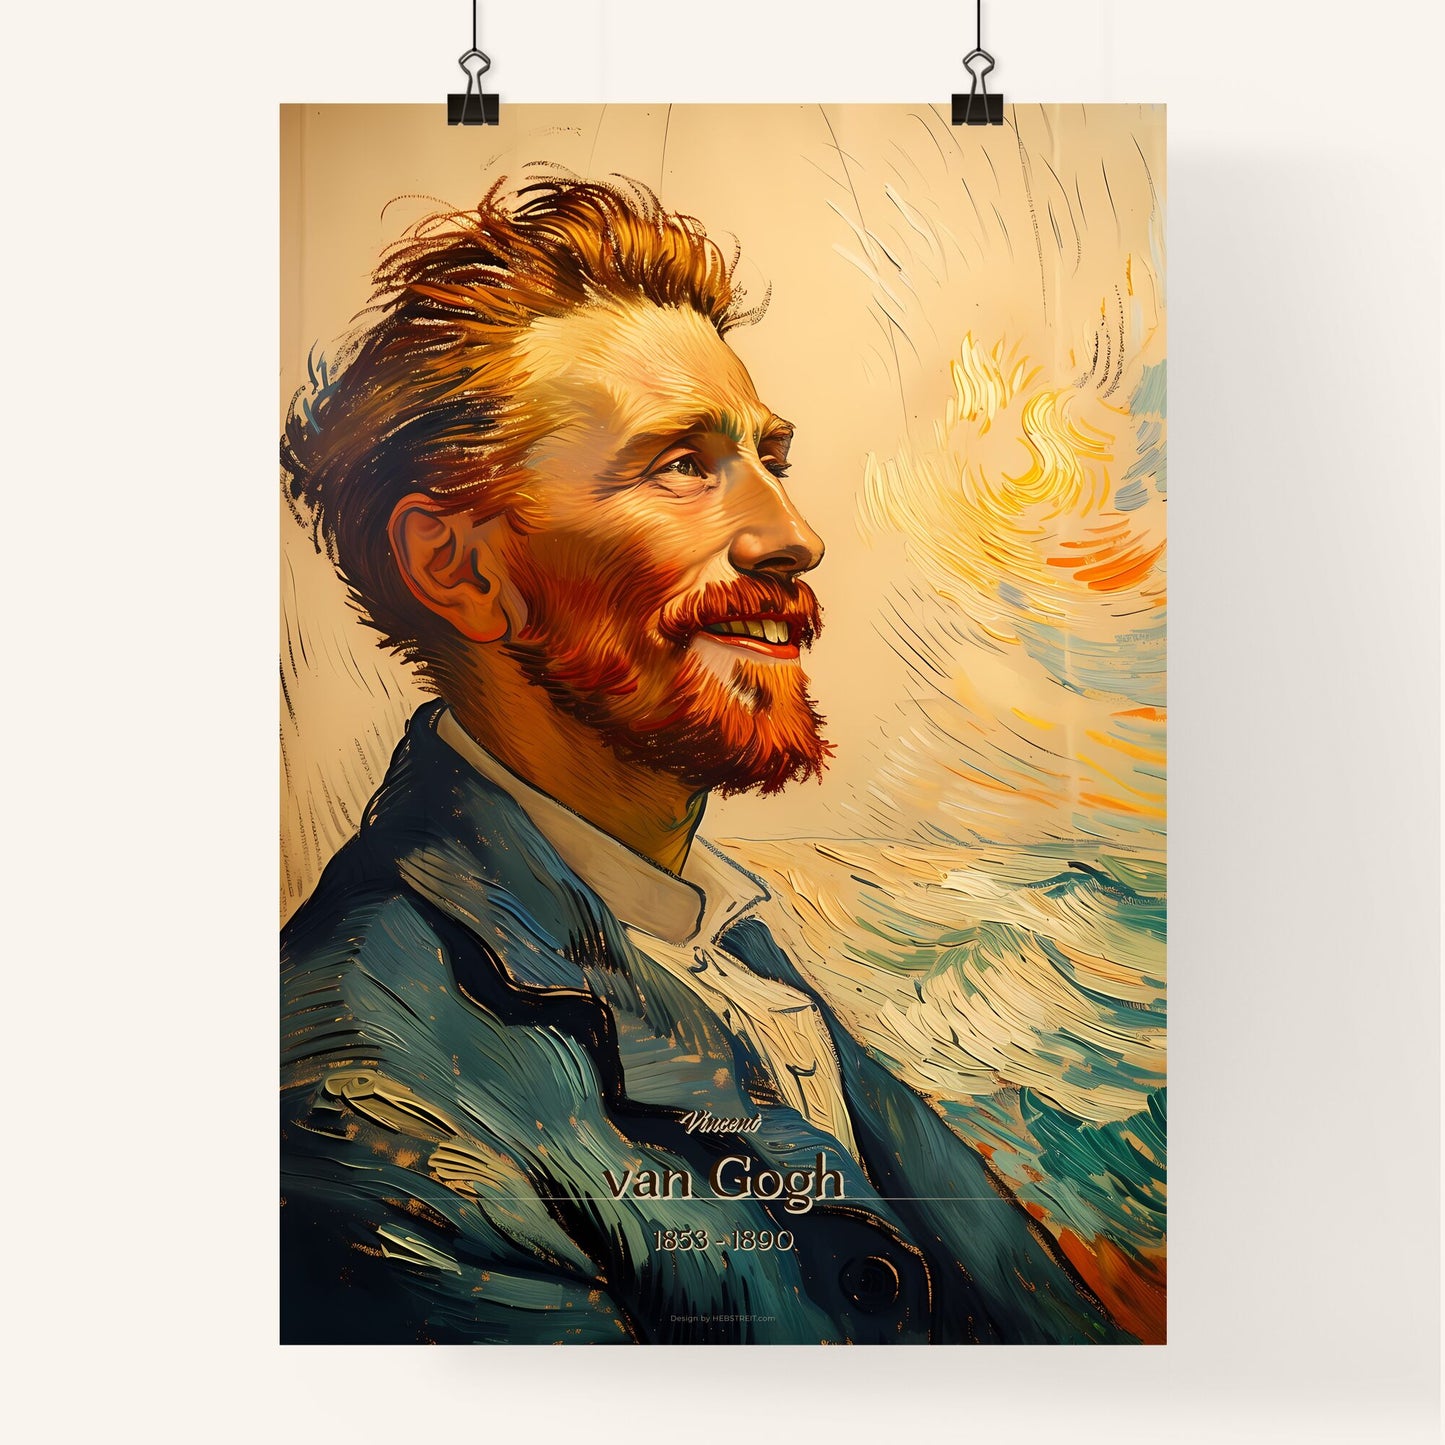 Vincent, van Gogh, 1853 - 1890, A Poster of a painting of a man with a beard Default Title